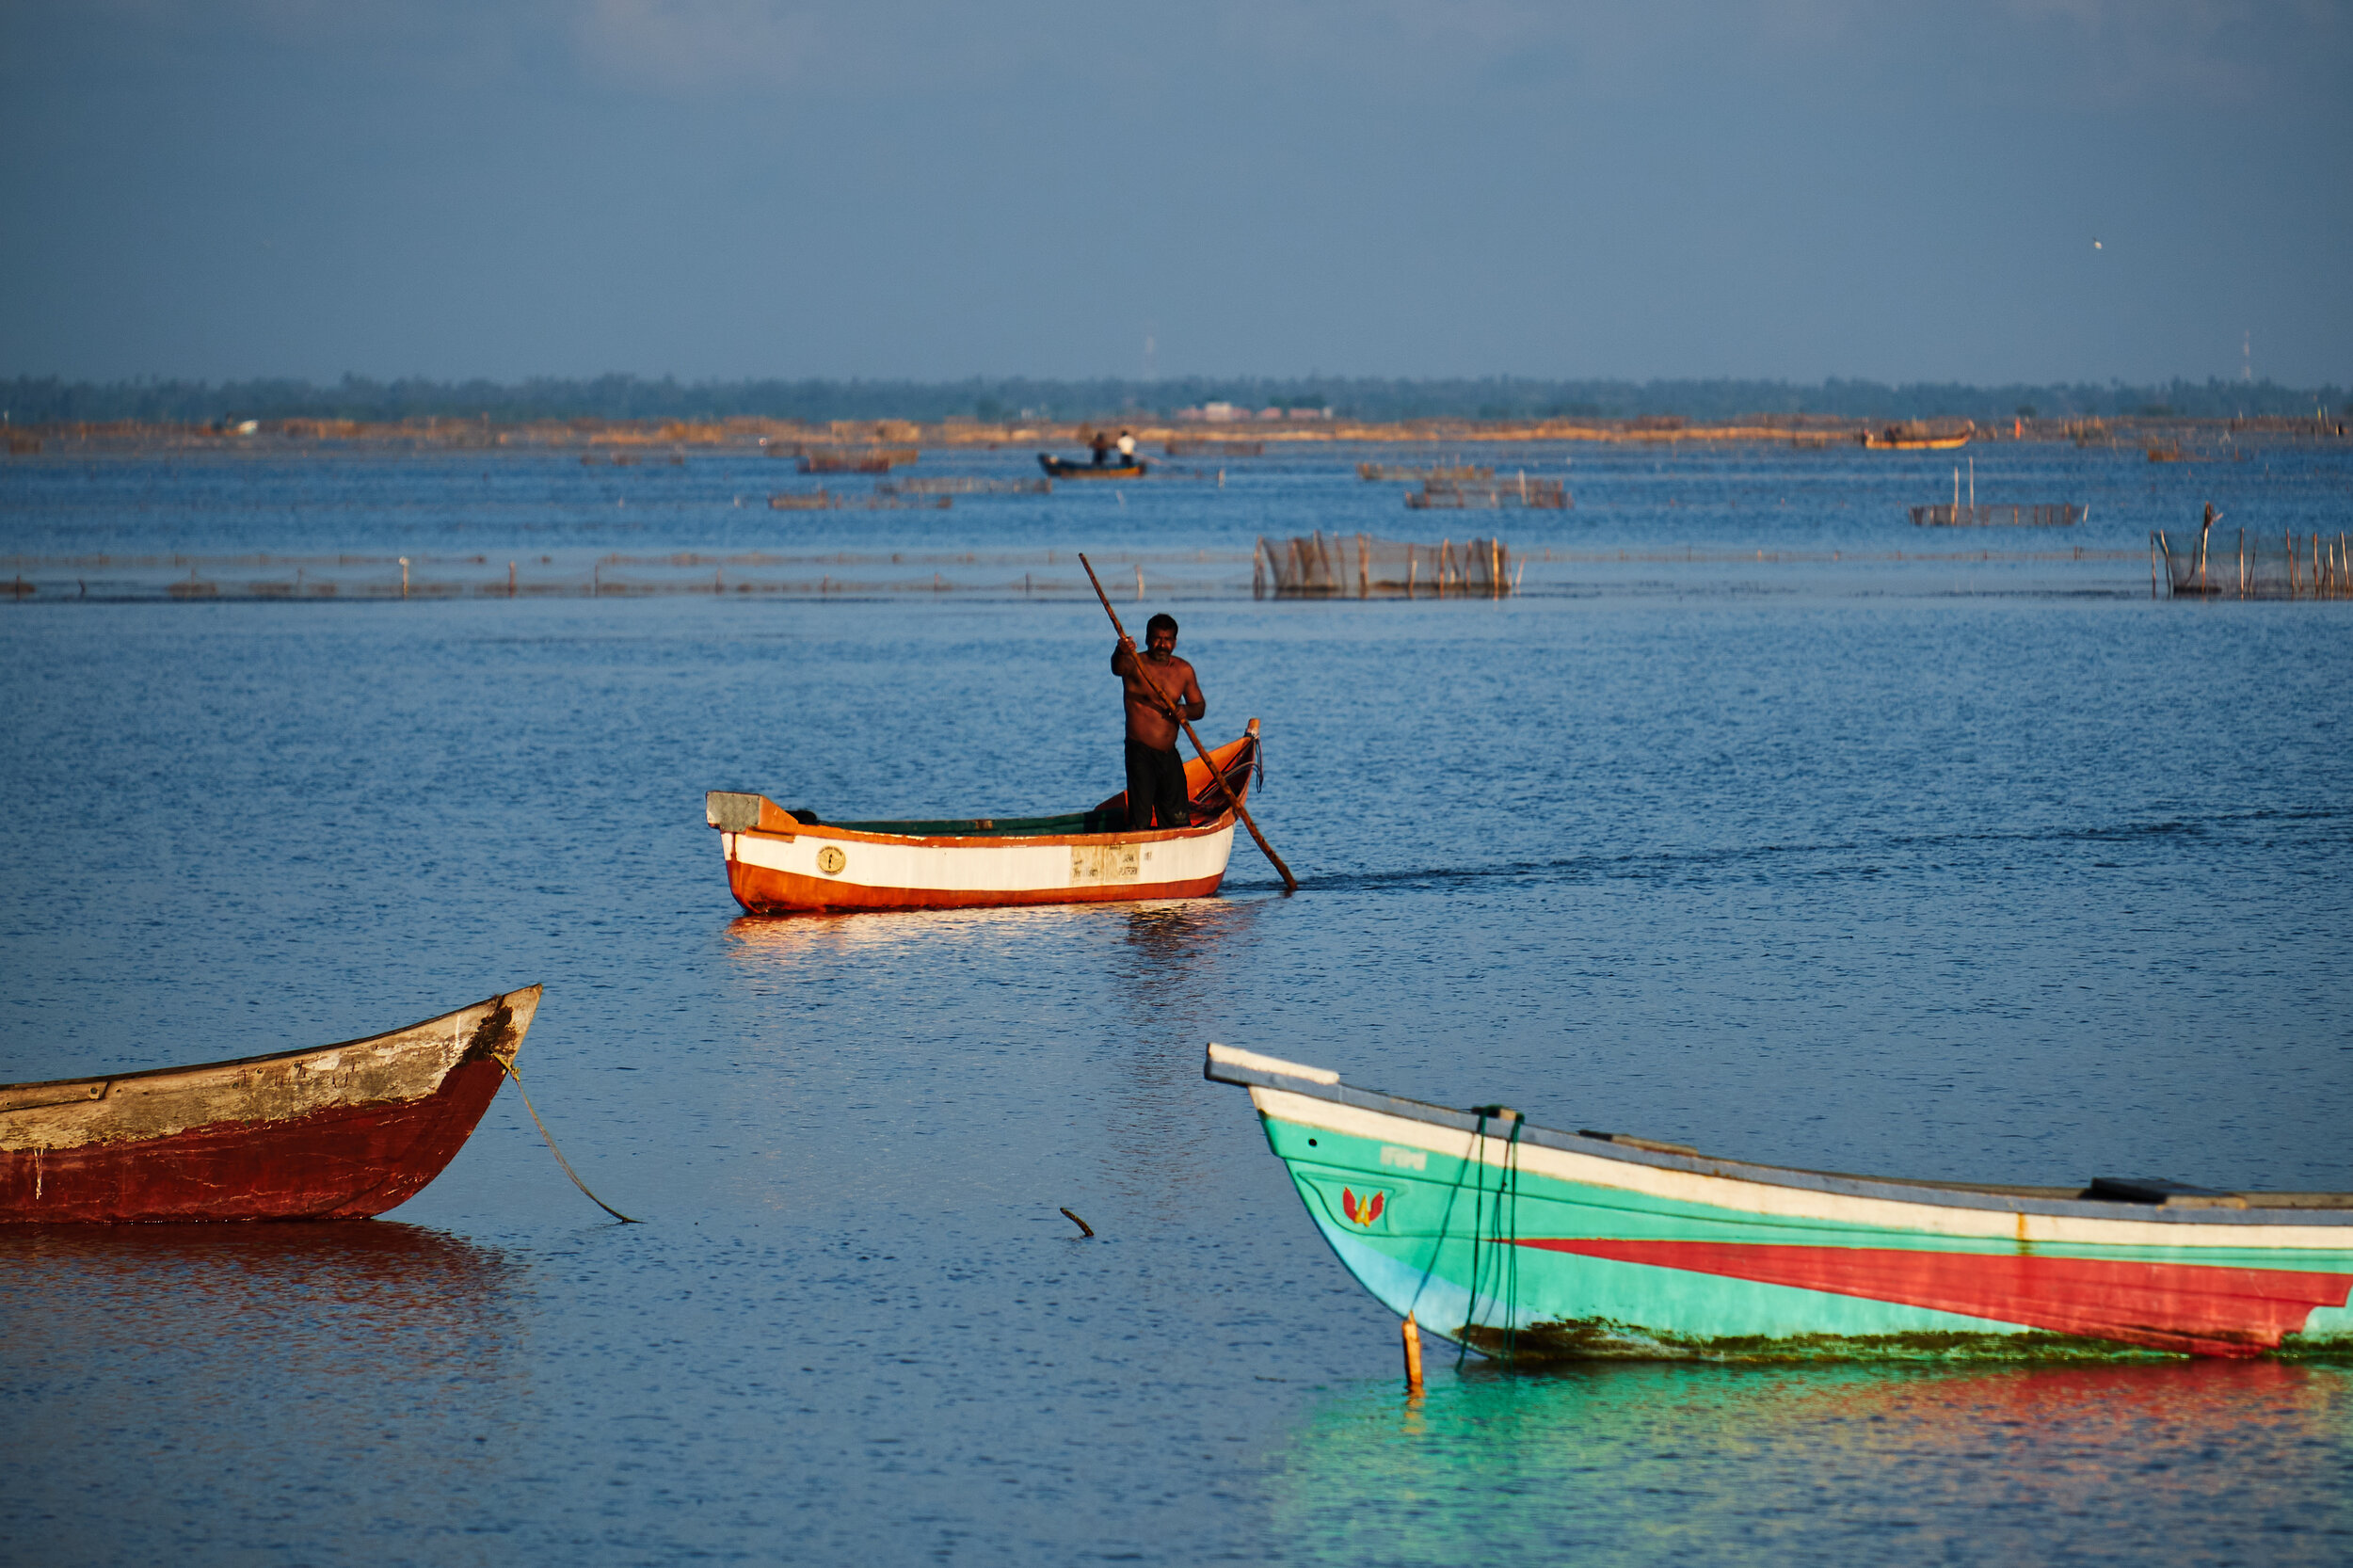   It is quite a scene to witness the boats navigating around the countless fishing nets and boats placed randomly around the regions by the individual fisherman.  